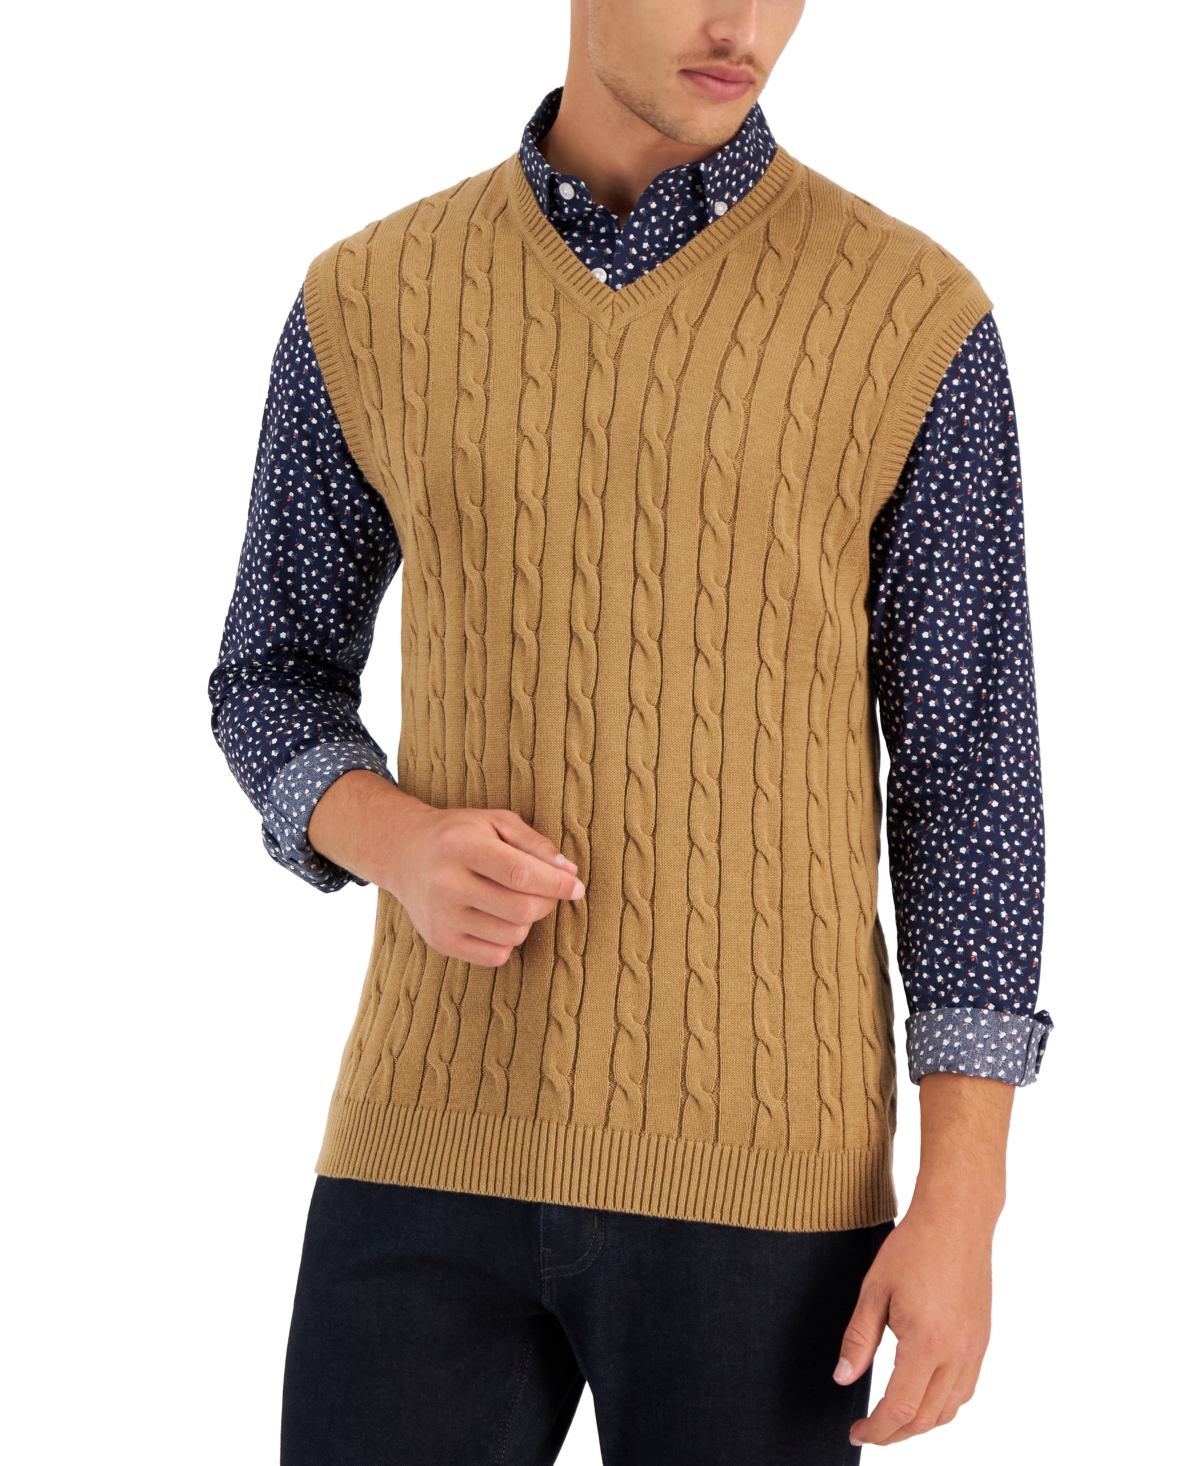 Men's Cable-Knit Cotton Sweater Vest, Created for Macy's - Navy Blue